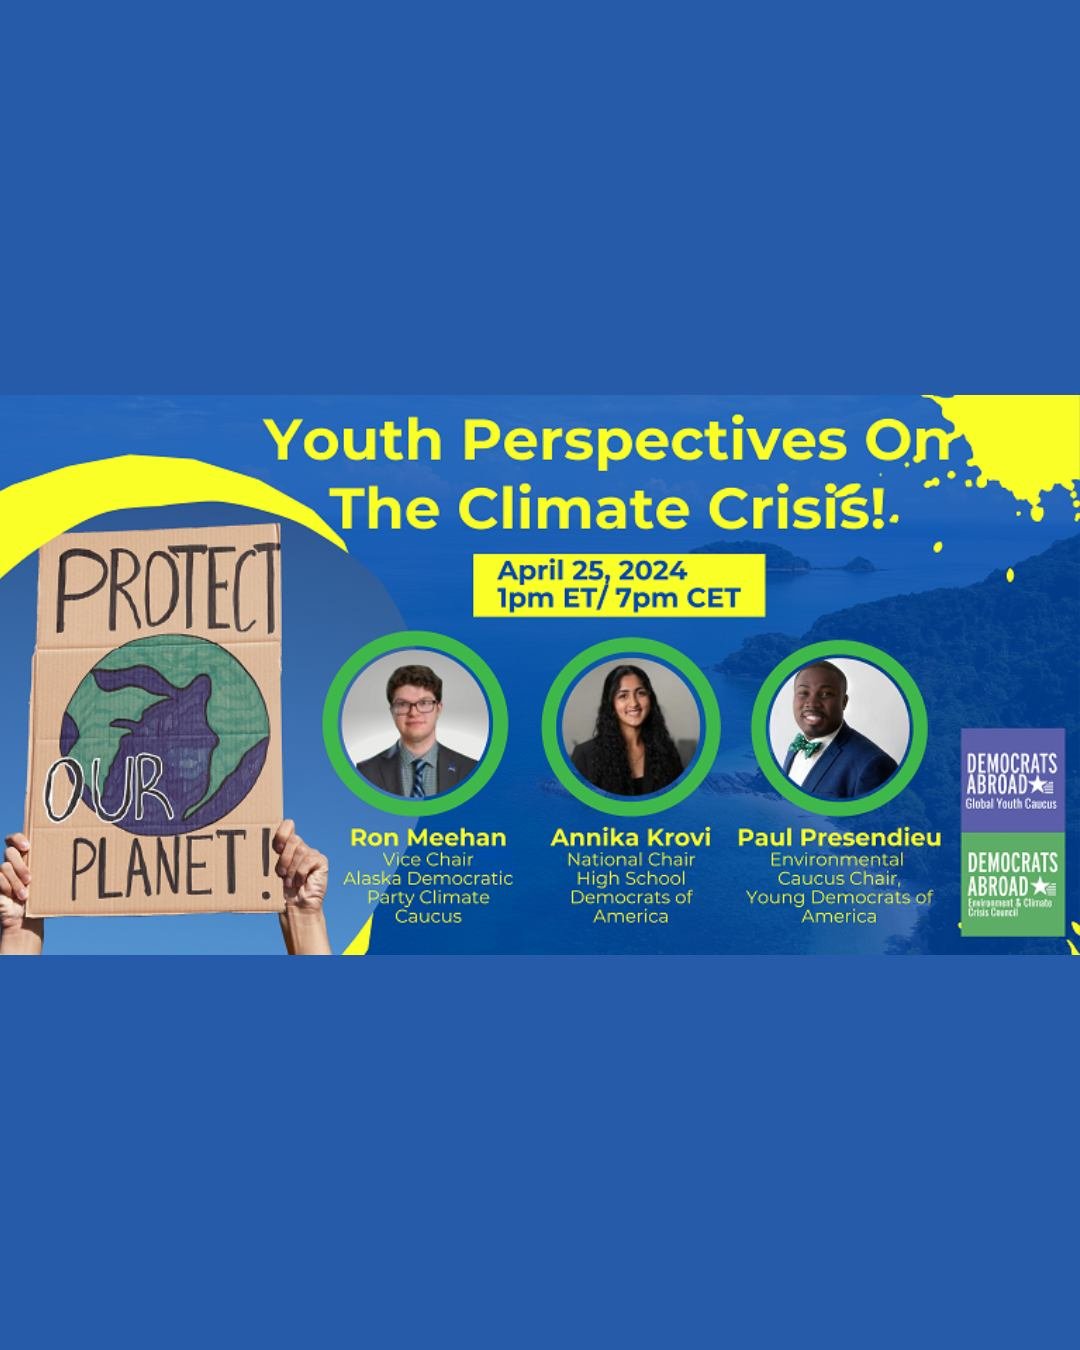 Join @demsabroad's Global Youth Caucus and Environment and Climate Crisis Council today, April 25th at 1:00 pm ET/7:00 pm CET for a vital panel to discuss youths' perspectives on the climate crisis. 

Hear from some extraordinary youth climate leader